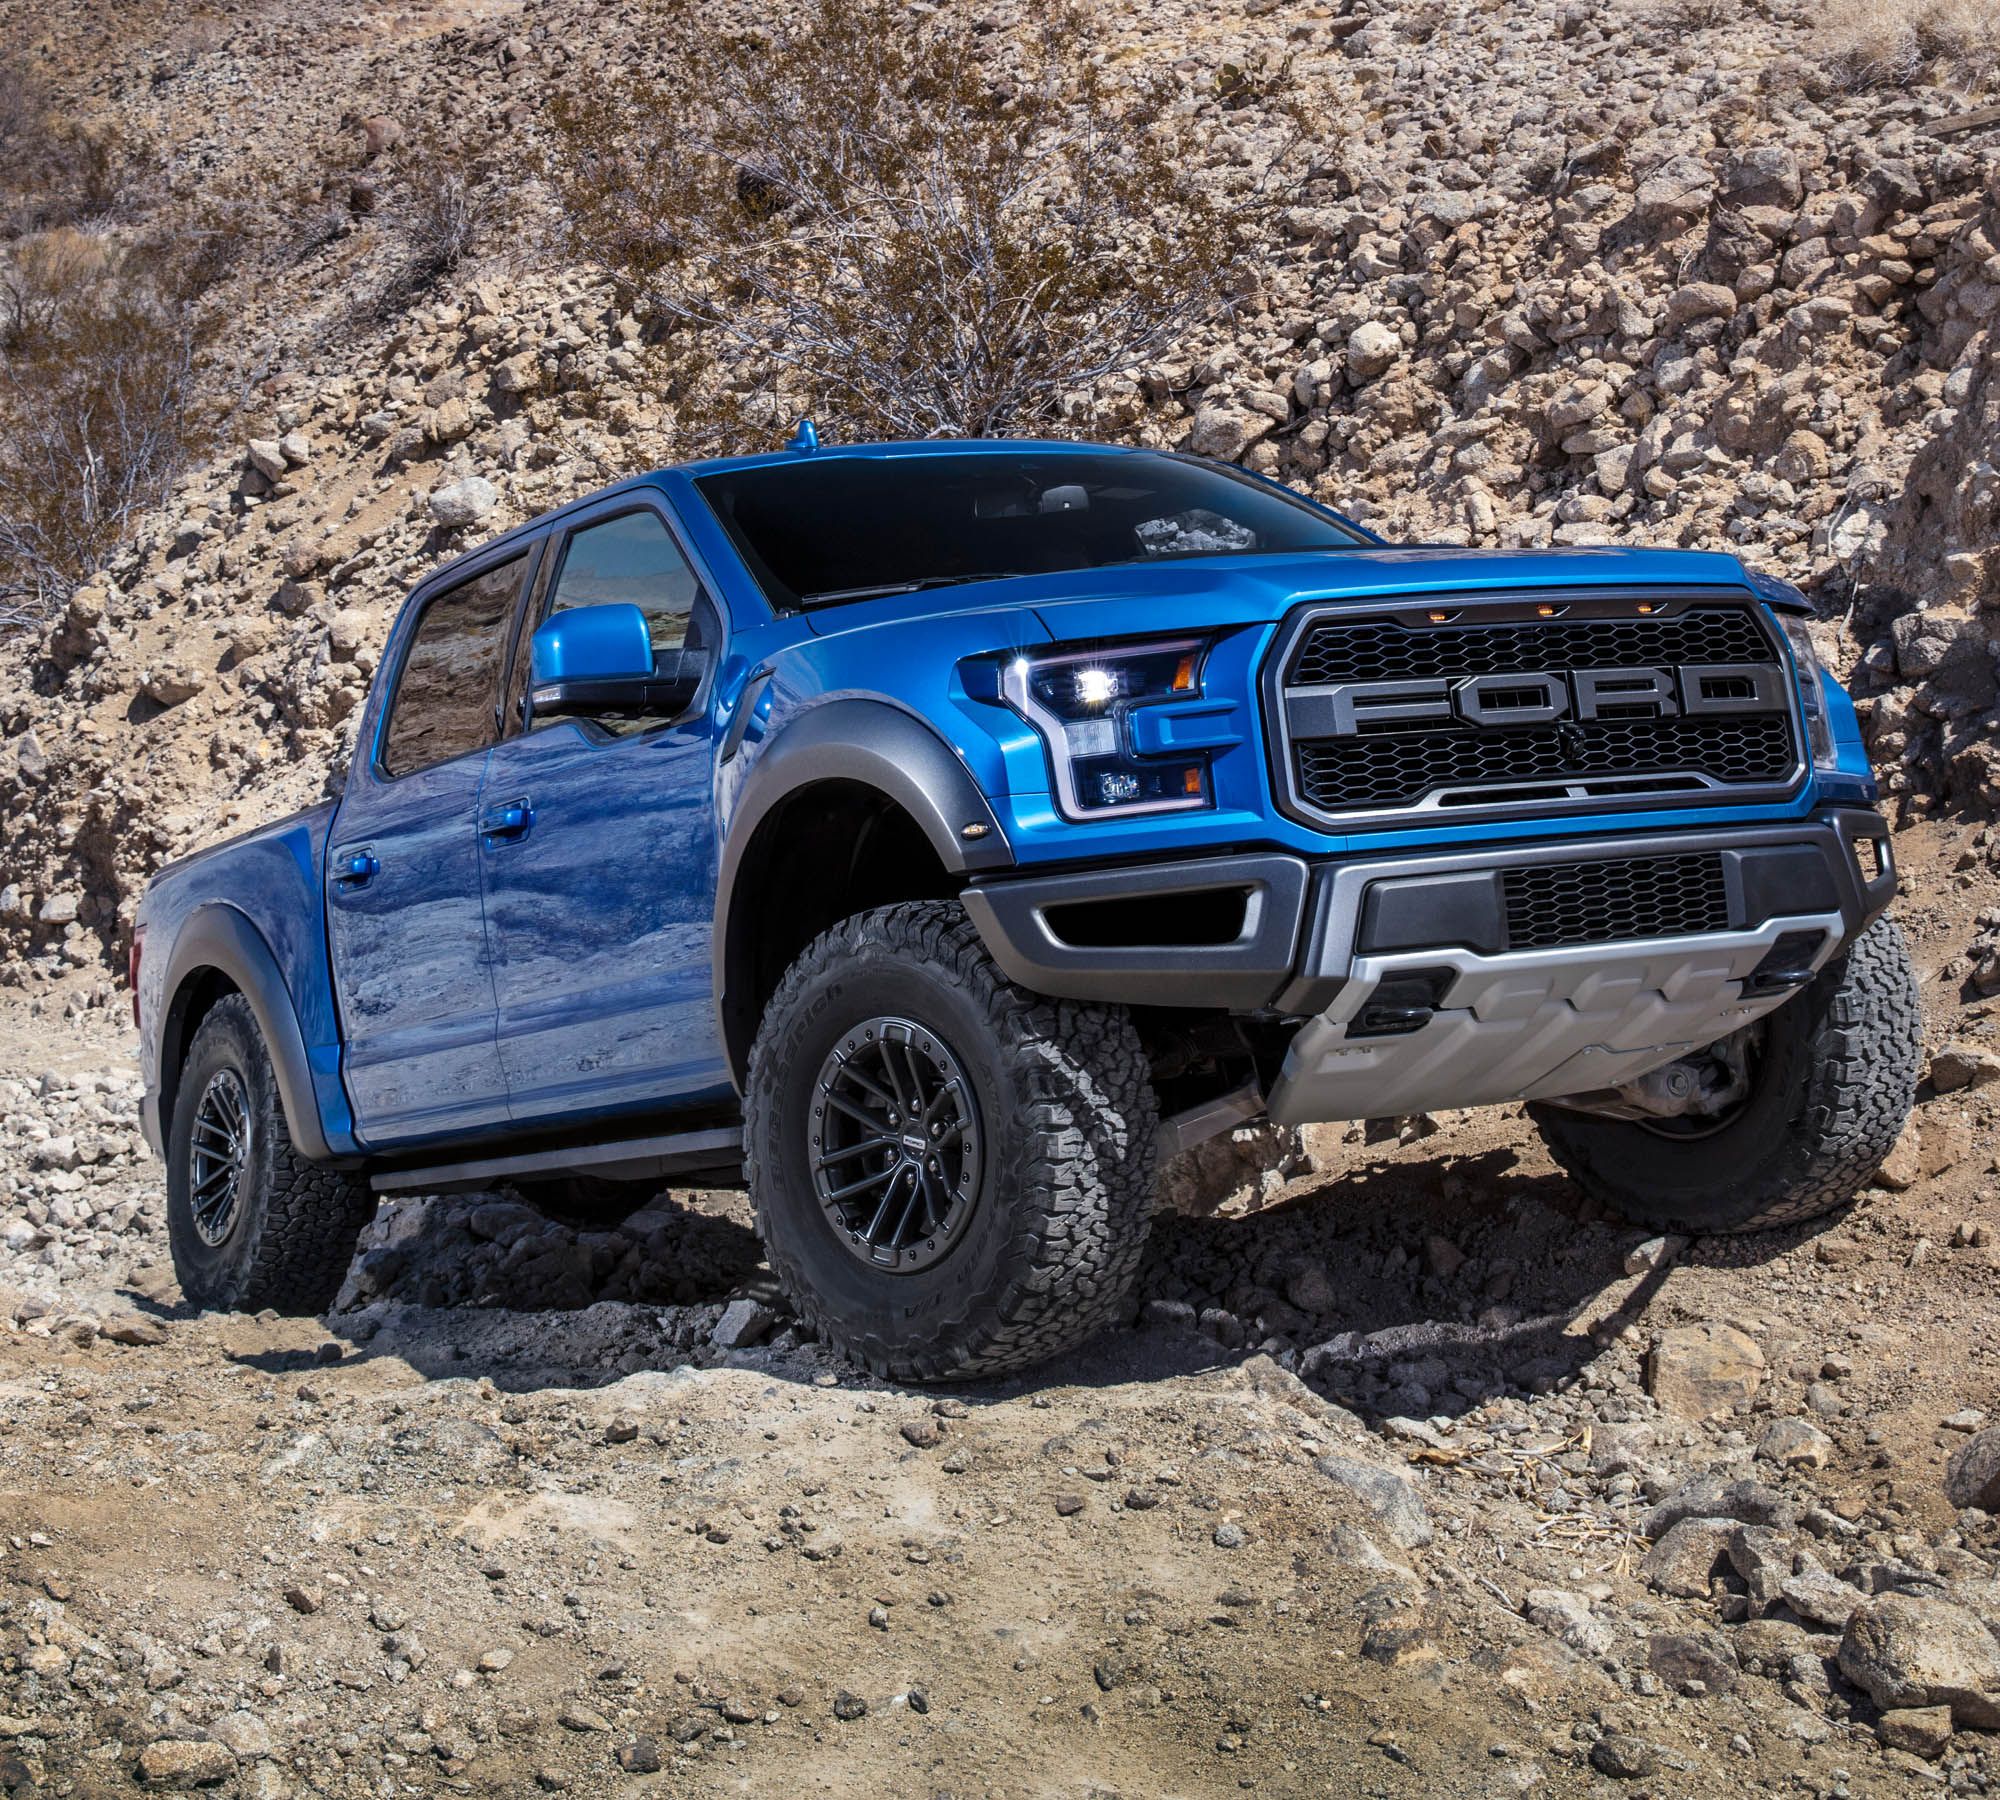 Ford SVT Raport Specialty Pickup, blue coloured, offroad